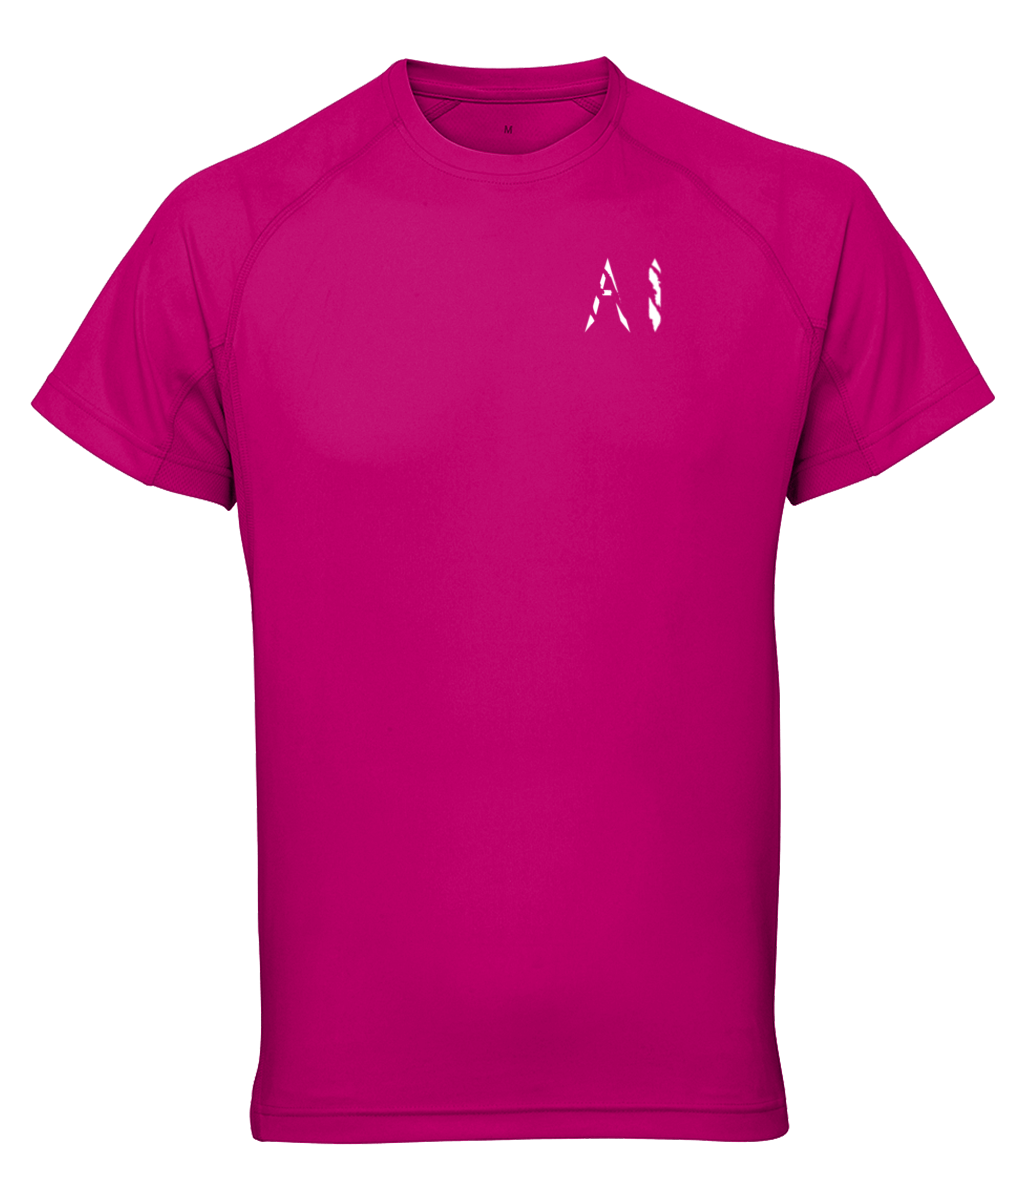 Womens magenta purple Athletic Performance Top with White AI logo on left breast